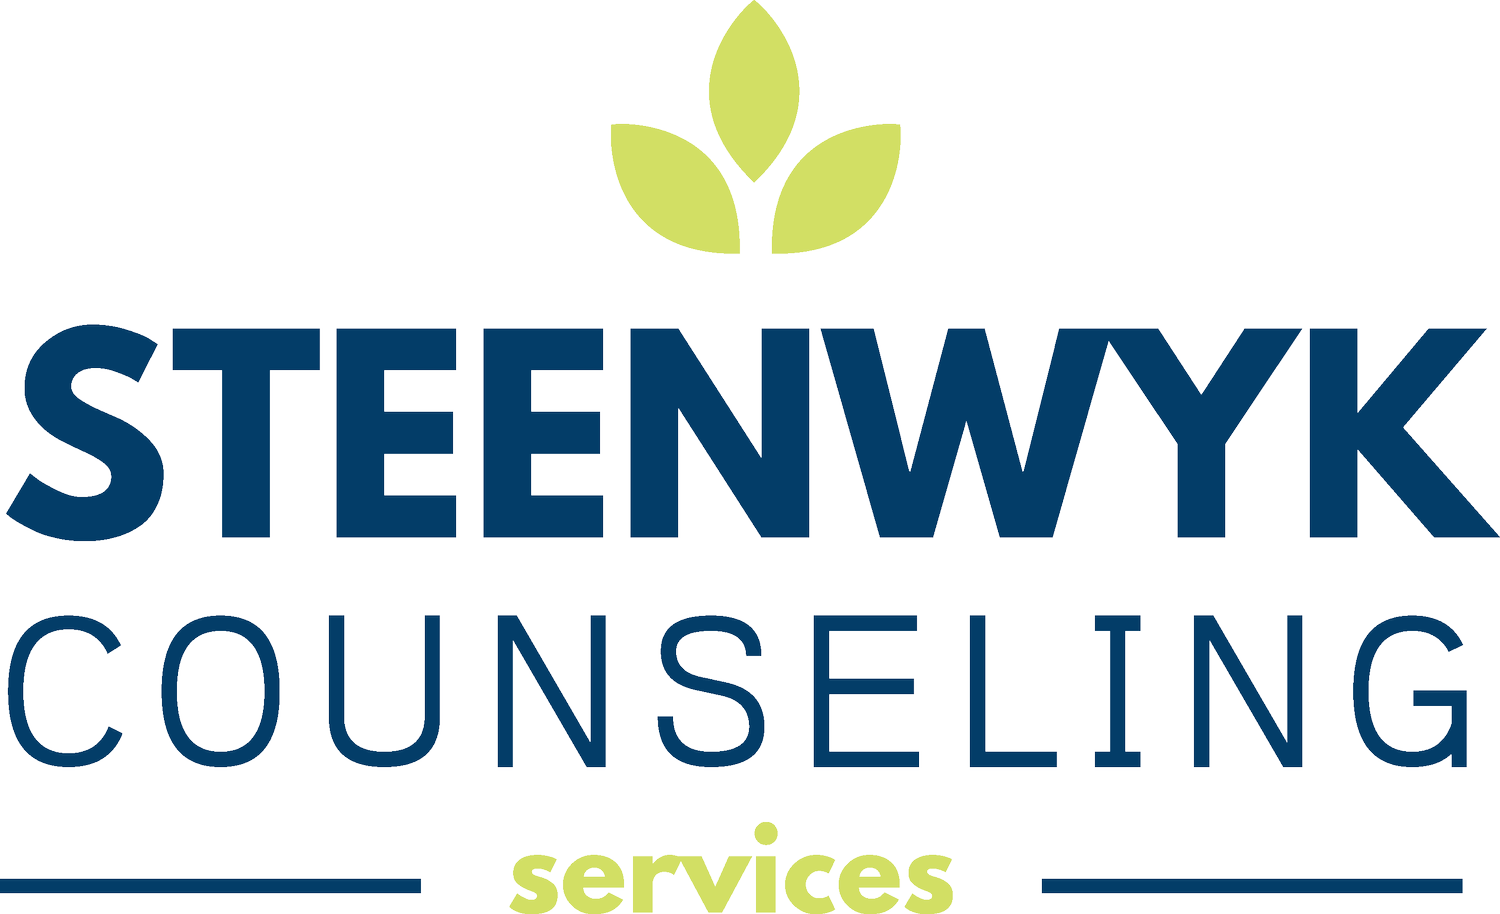 Scott Steenwyk Counseling Services